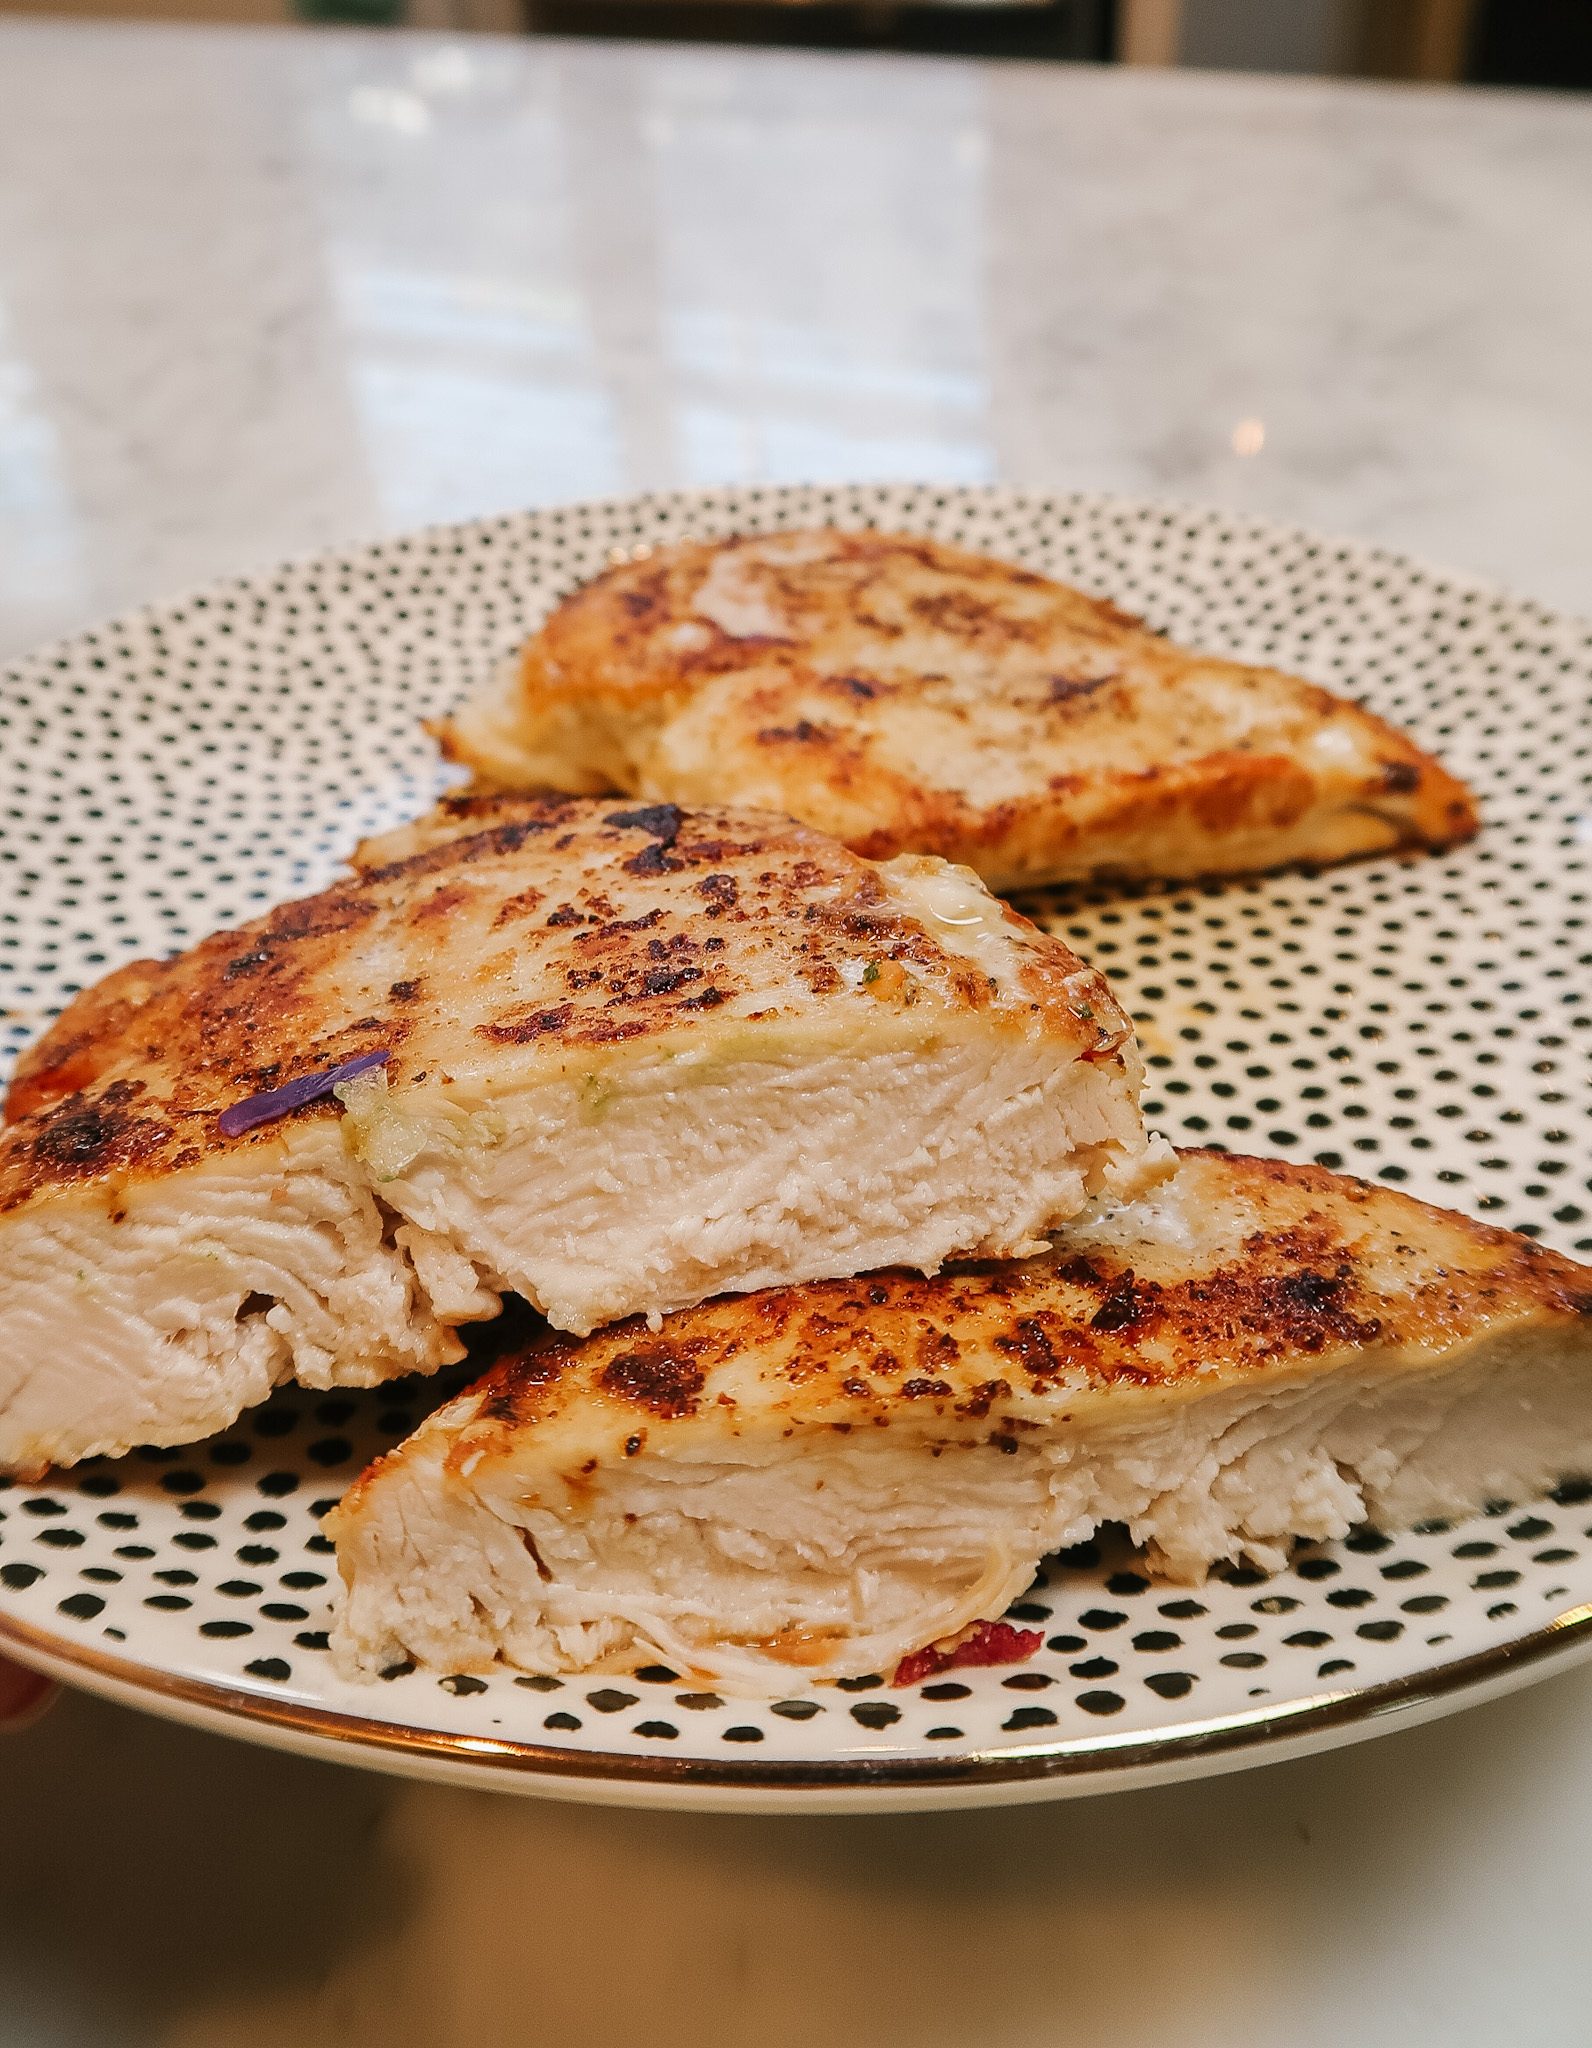 Perfectly cooked chicken breast